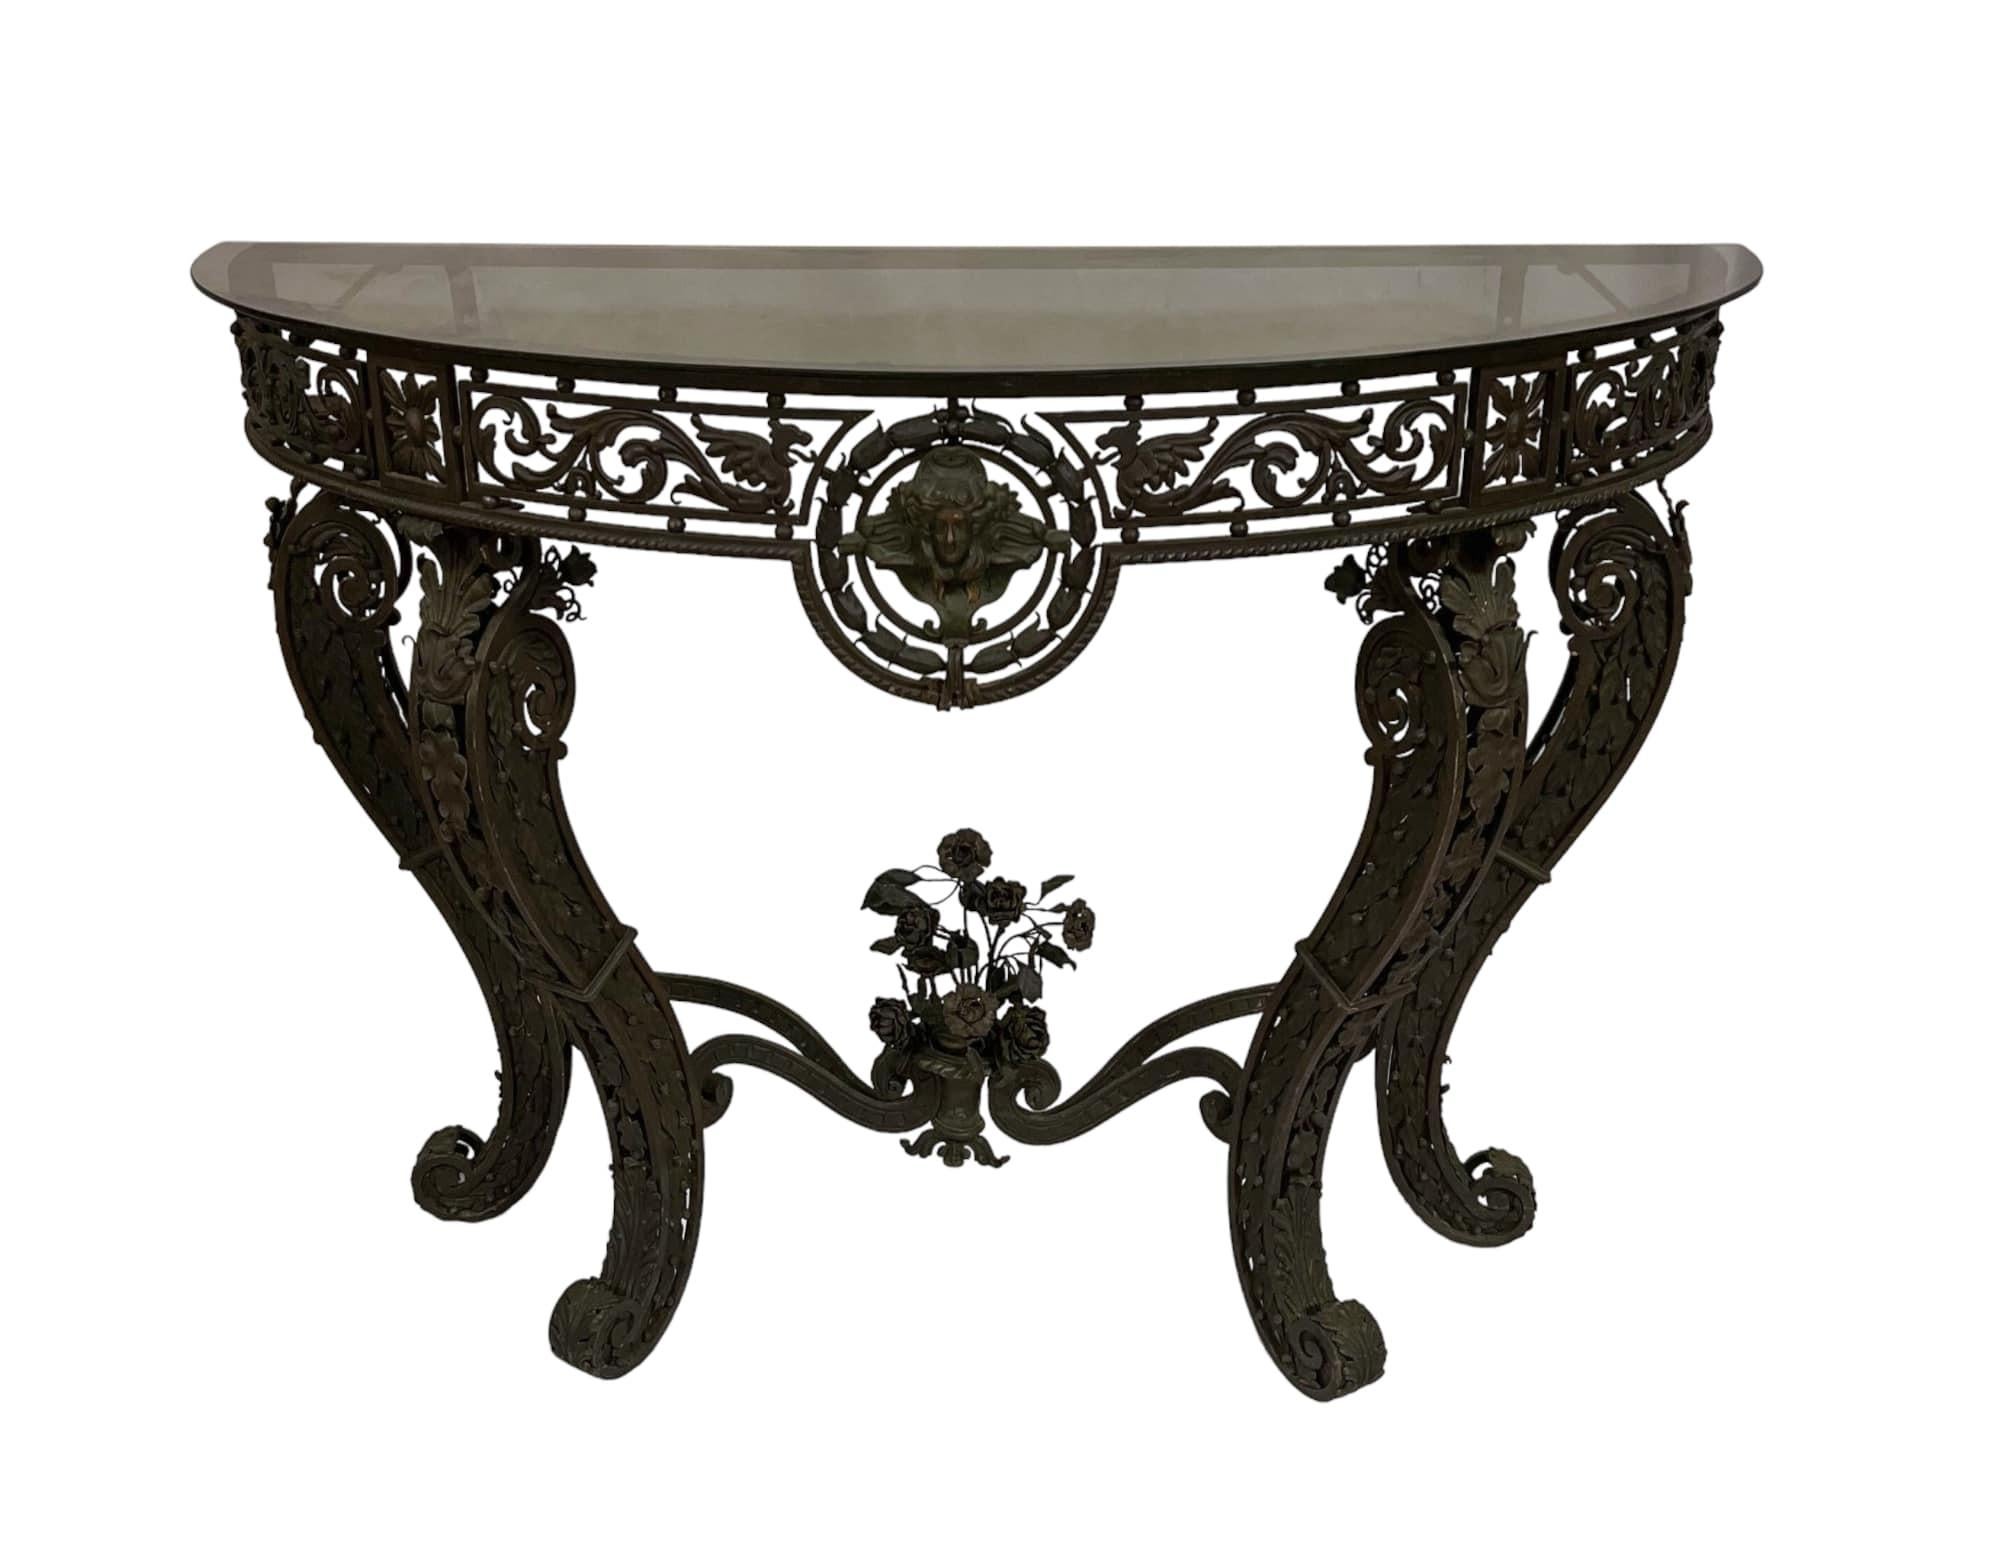 Handcrafted circa 1875 by a metal artist schooled in Europe, the antique wrought iron demi-lune console table is topped with a 1/4 inch smoky glass. It stands on cabriole-shaped legs adorned with the most intricate metal floral embellishments.